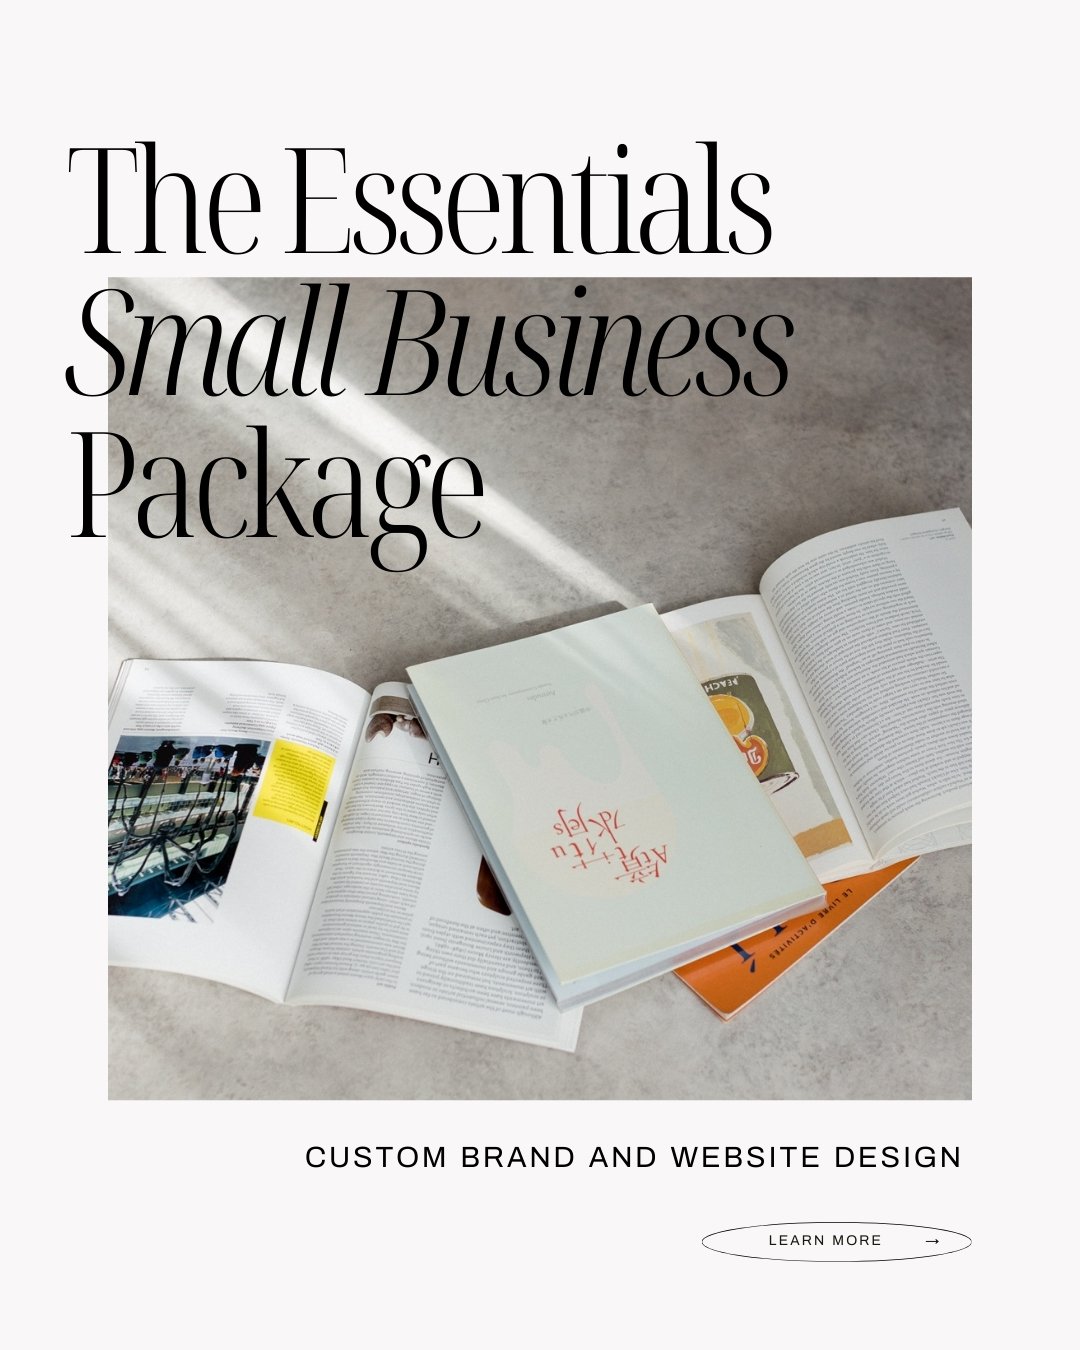 When it comes to creating the perfect visuals and website for your brand or small business, we know how overwhelming it can be to actually achieve that vision. 

Not knowing how to get from moodboard to a strategic, authentic, unique, and successful 